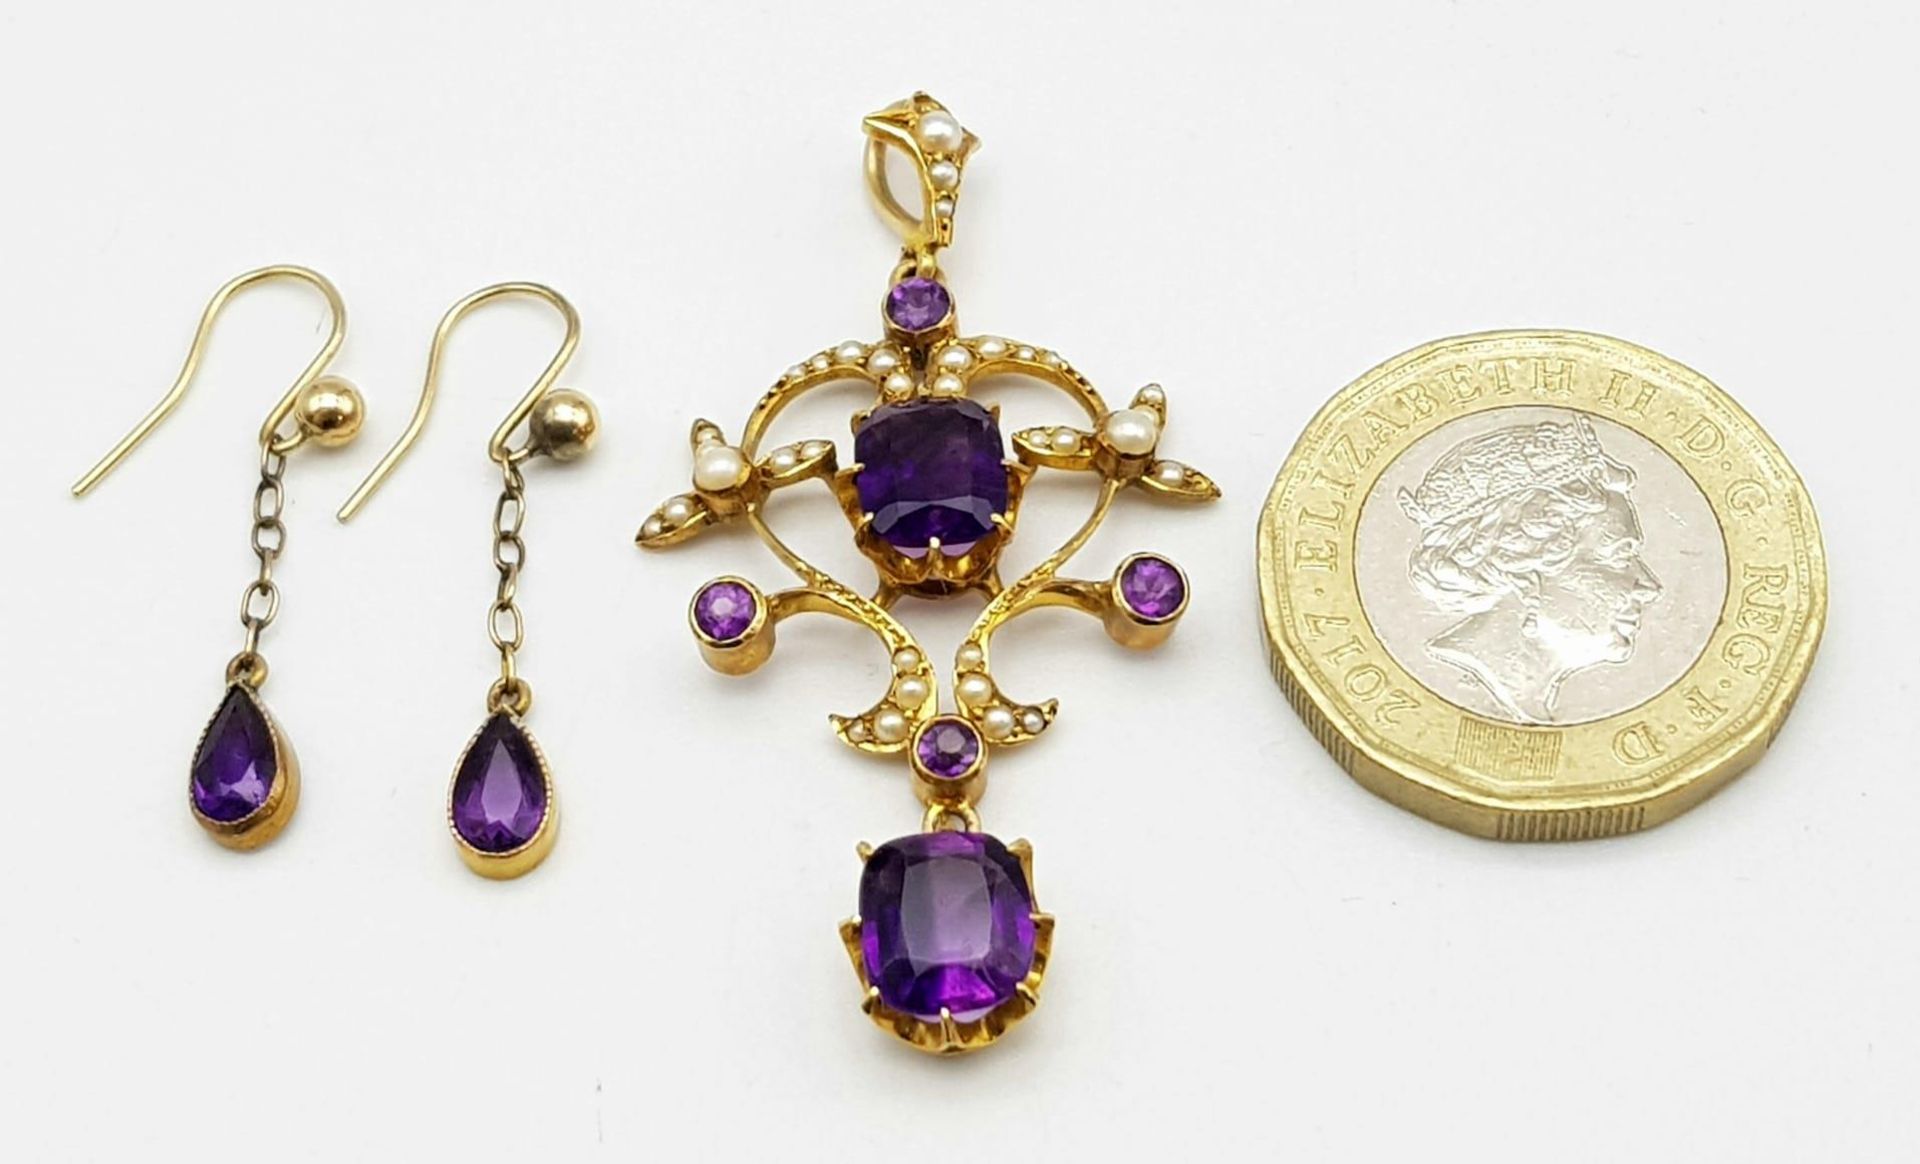 An ART NOUVEAU 9 K yellow gold pendant with vivid coloured amethysts and natural seed pearls, - Image 7 of 7